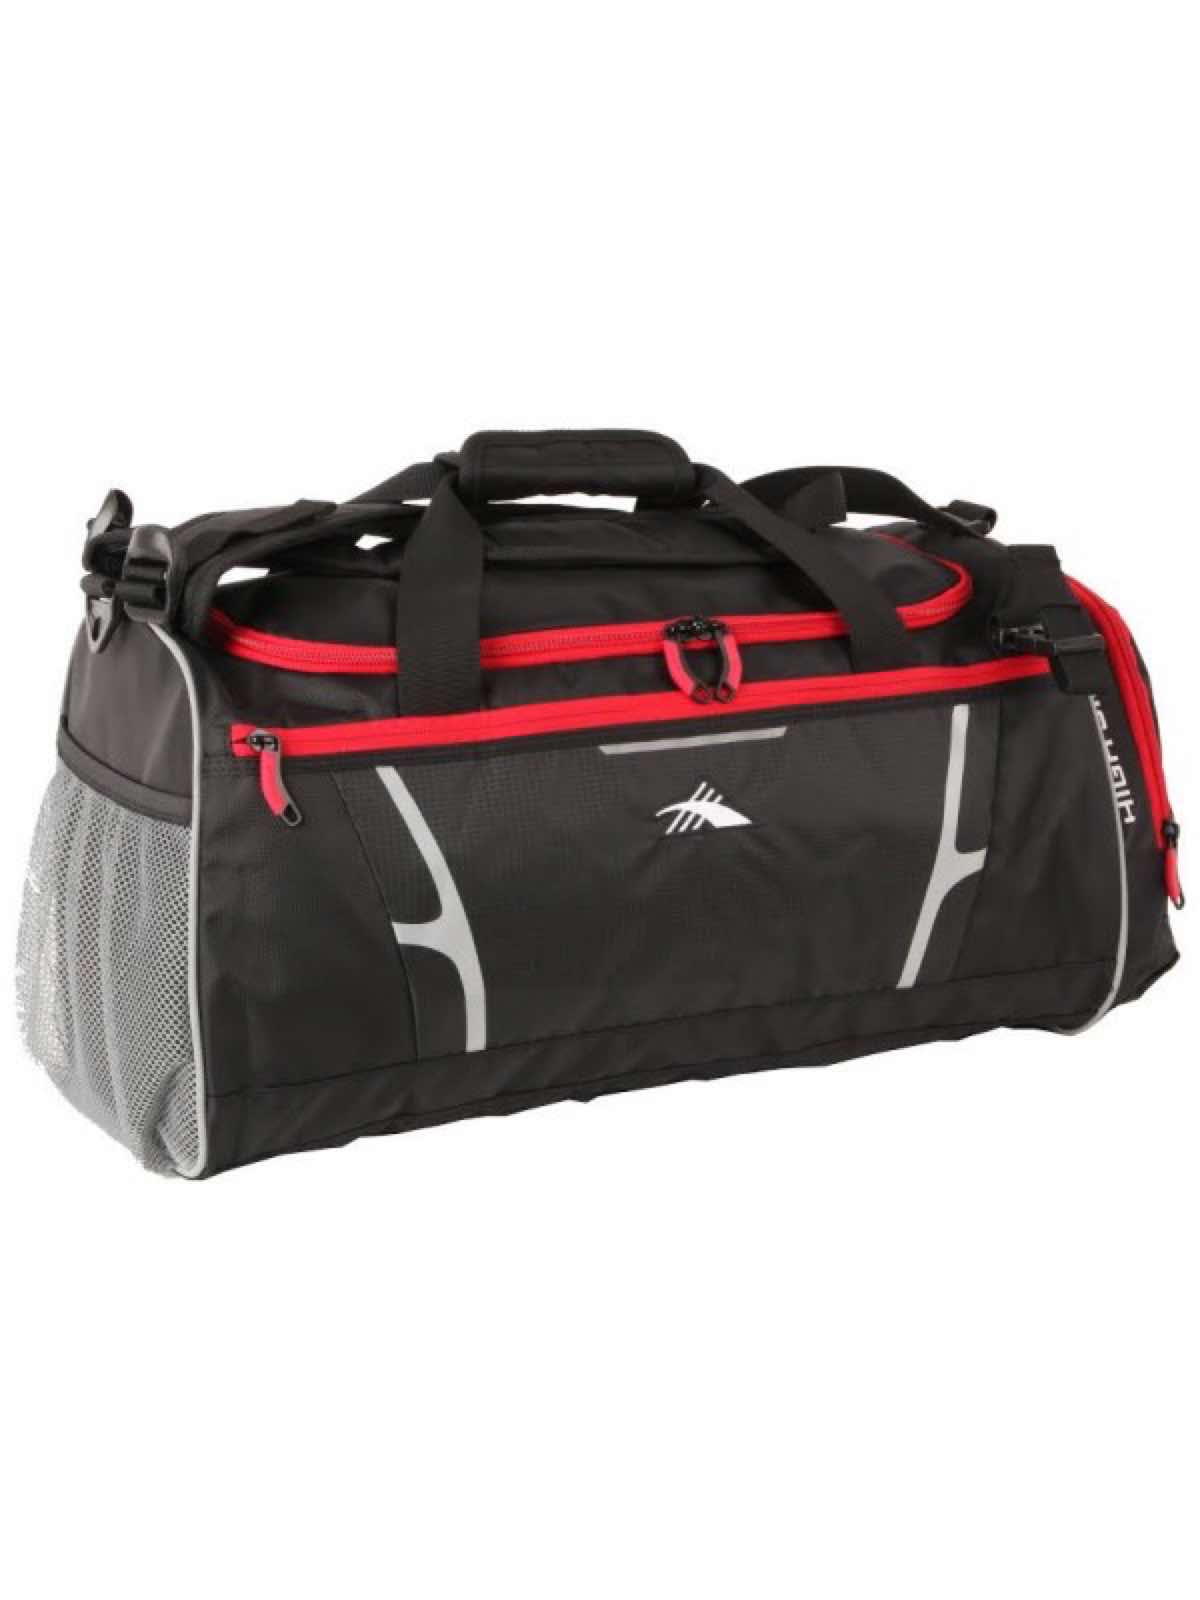 Wheeled Duffel Bag With Backpack Straps | IQS Executive